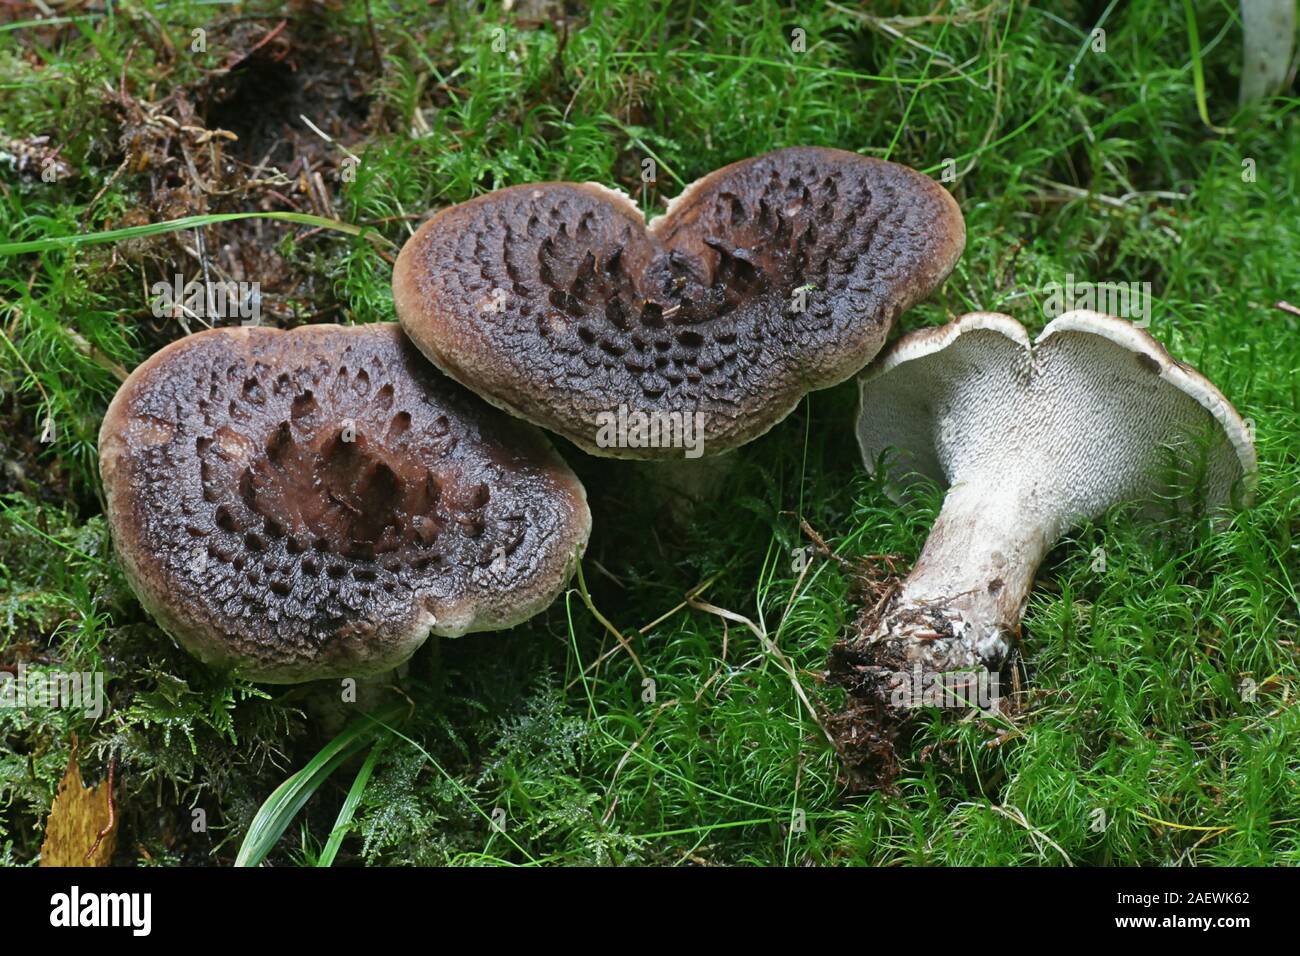 Sarcodon imbricatus, known as the shingled hedgehog, scaly hedgehog or  Scaly Tooth, a  tooth fungus from Finland Stock Photo